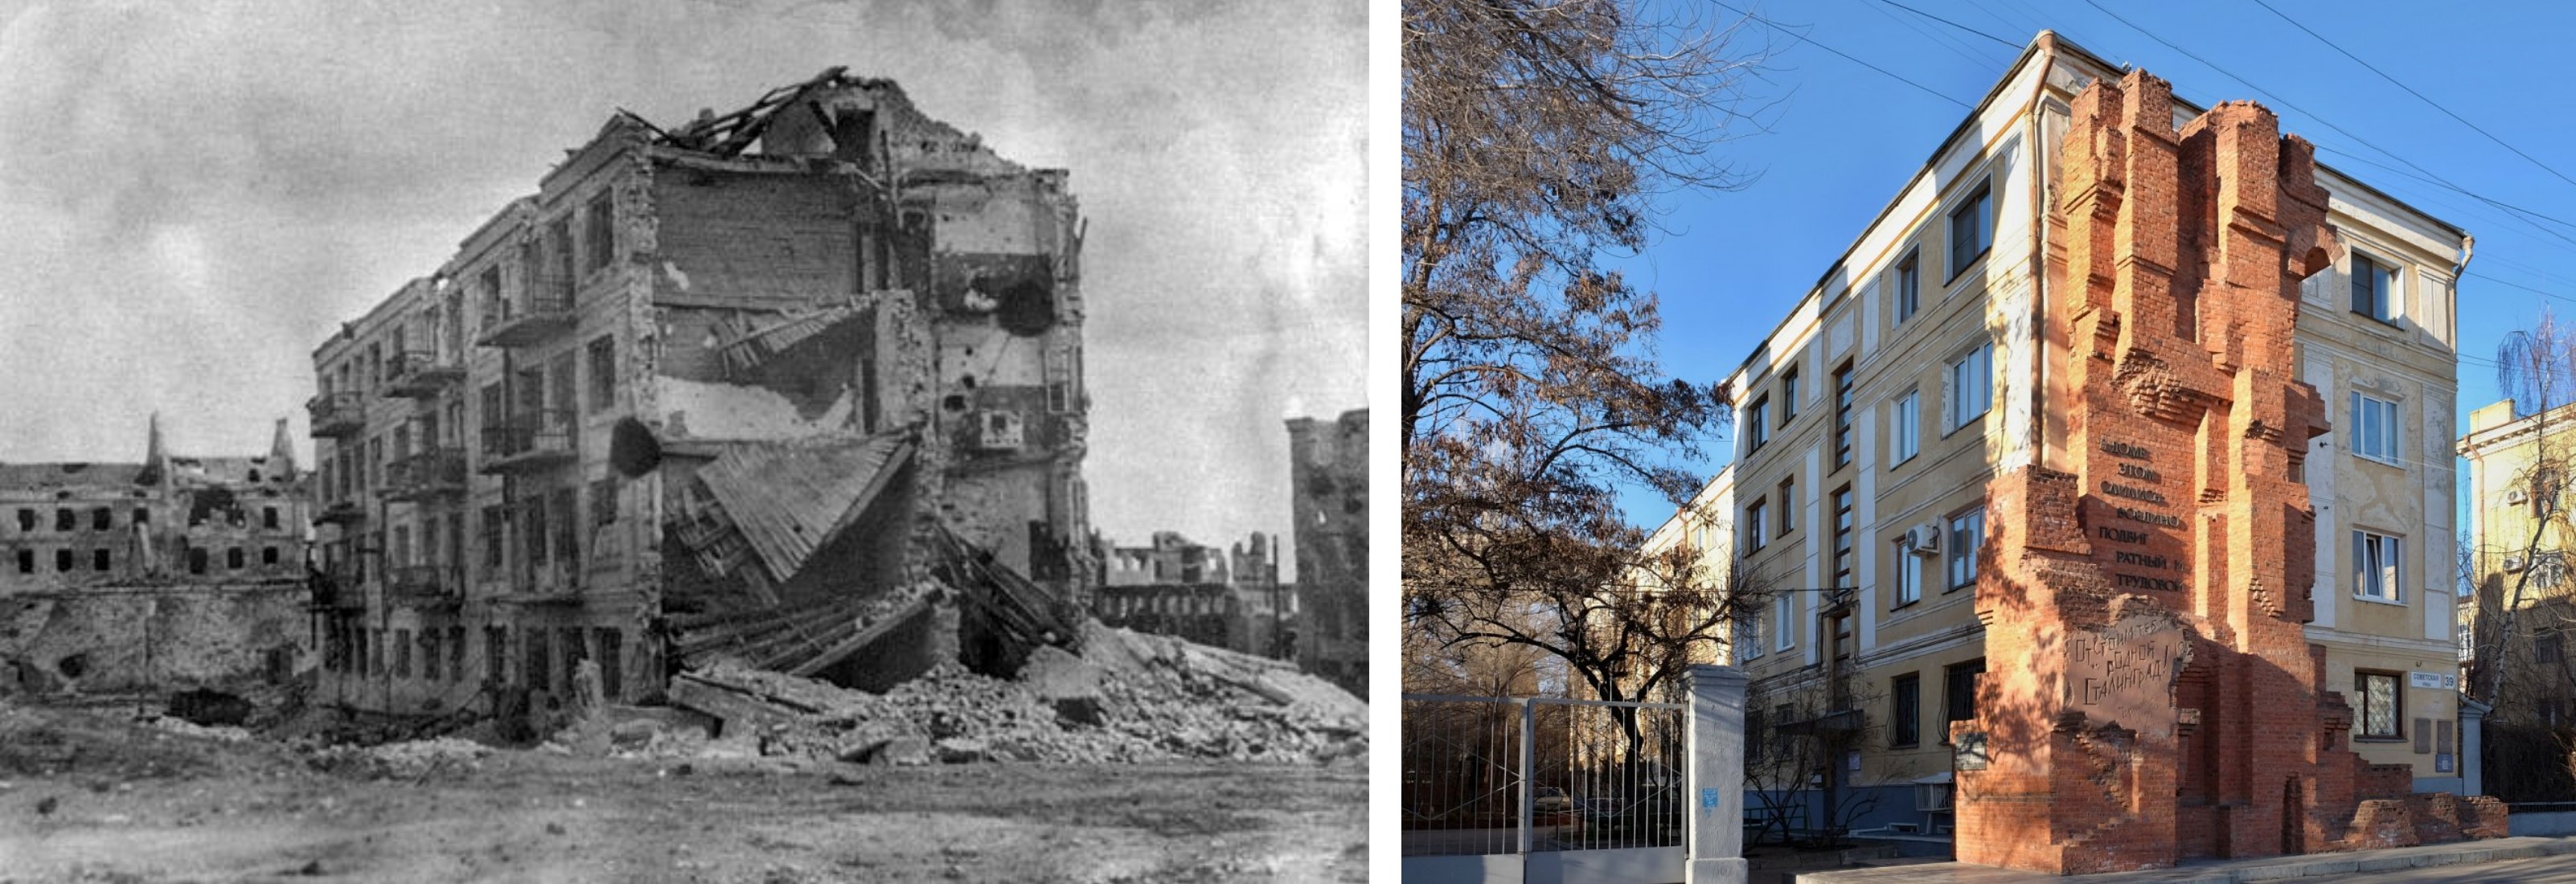 On the left, Pavlov's House in 1943. On the right, the red-brick wall is what remains of the Pavlov House in downtown Volgograd..